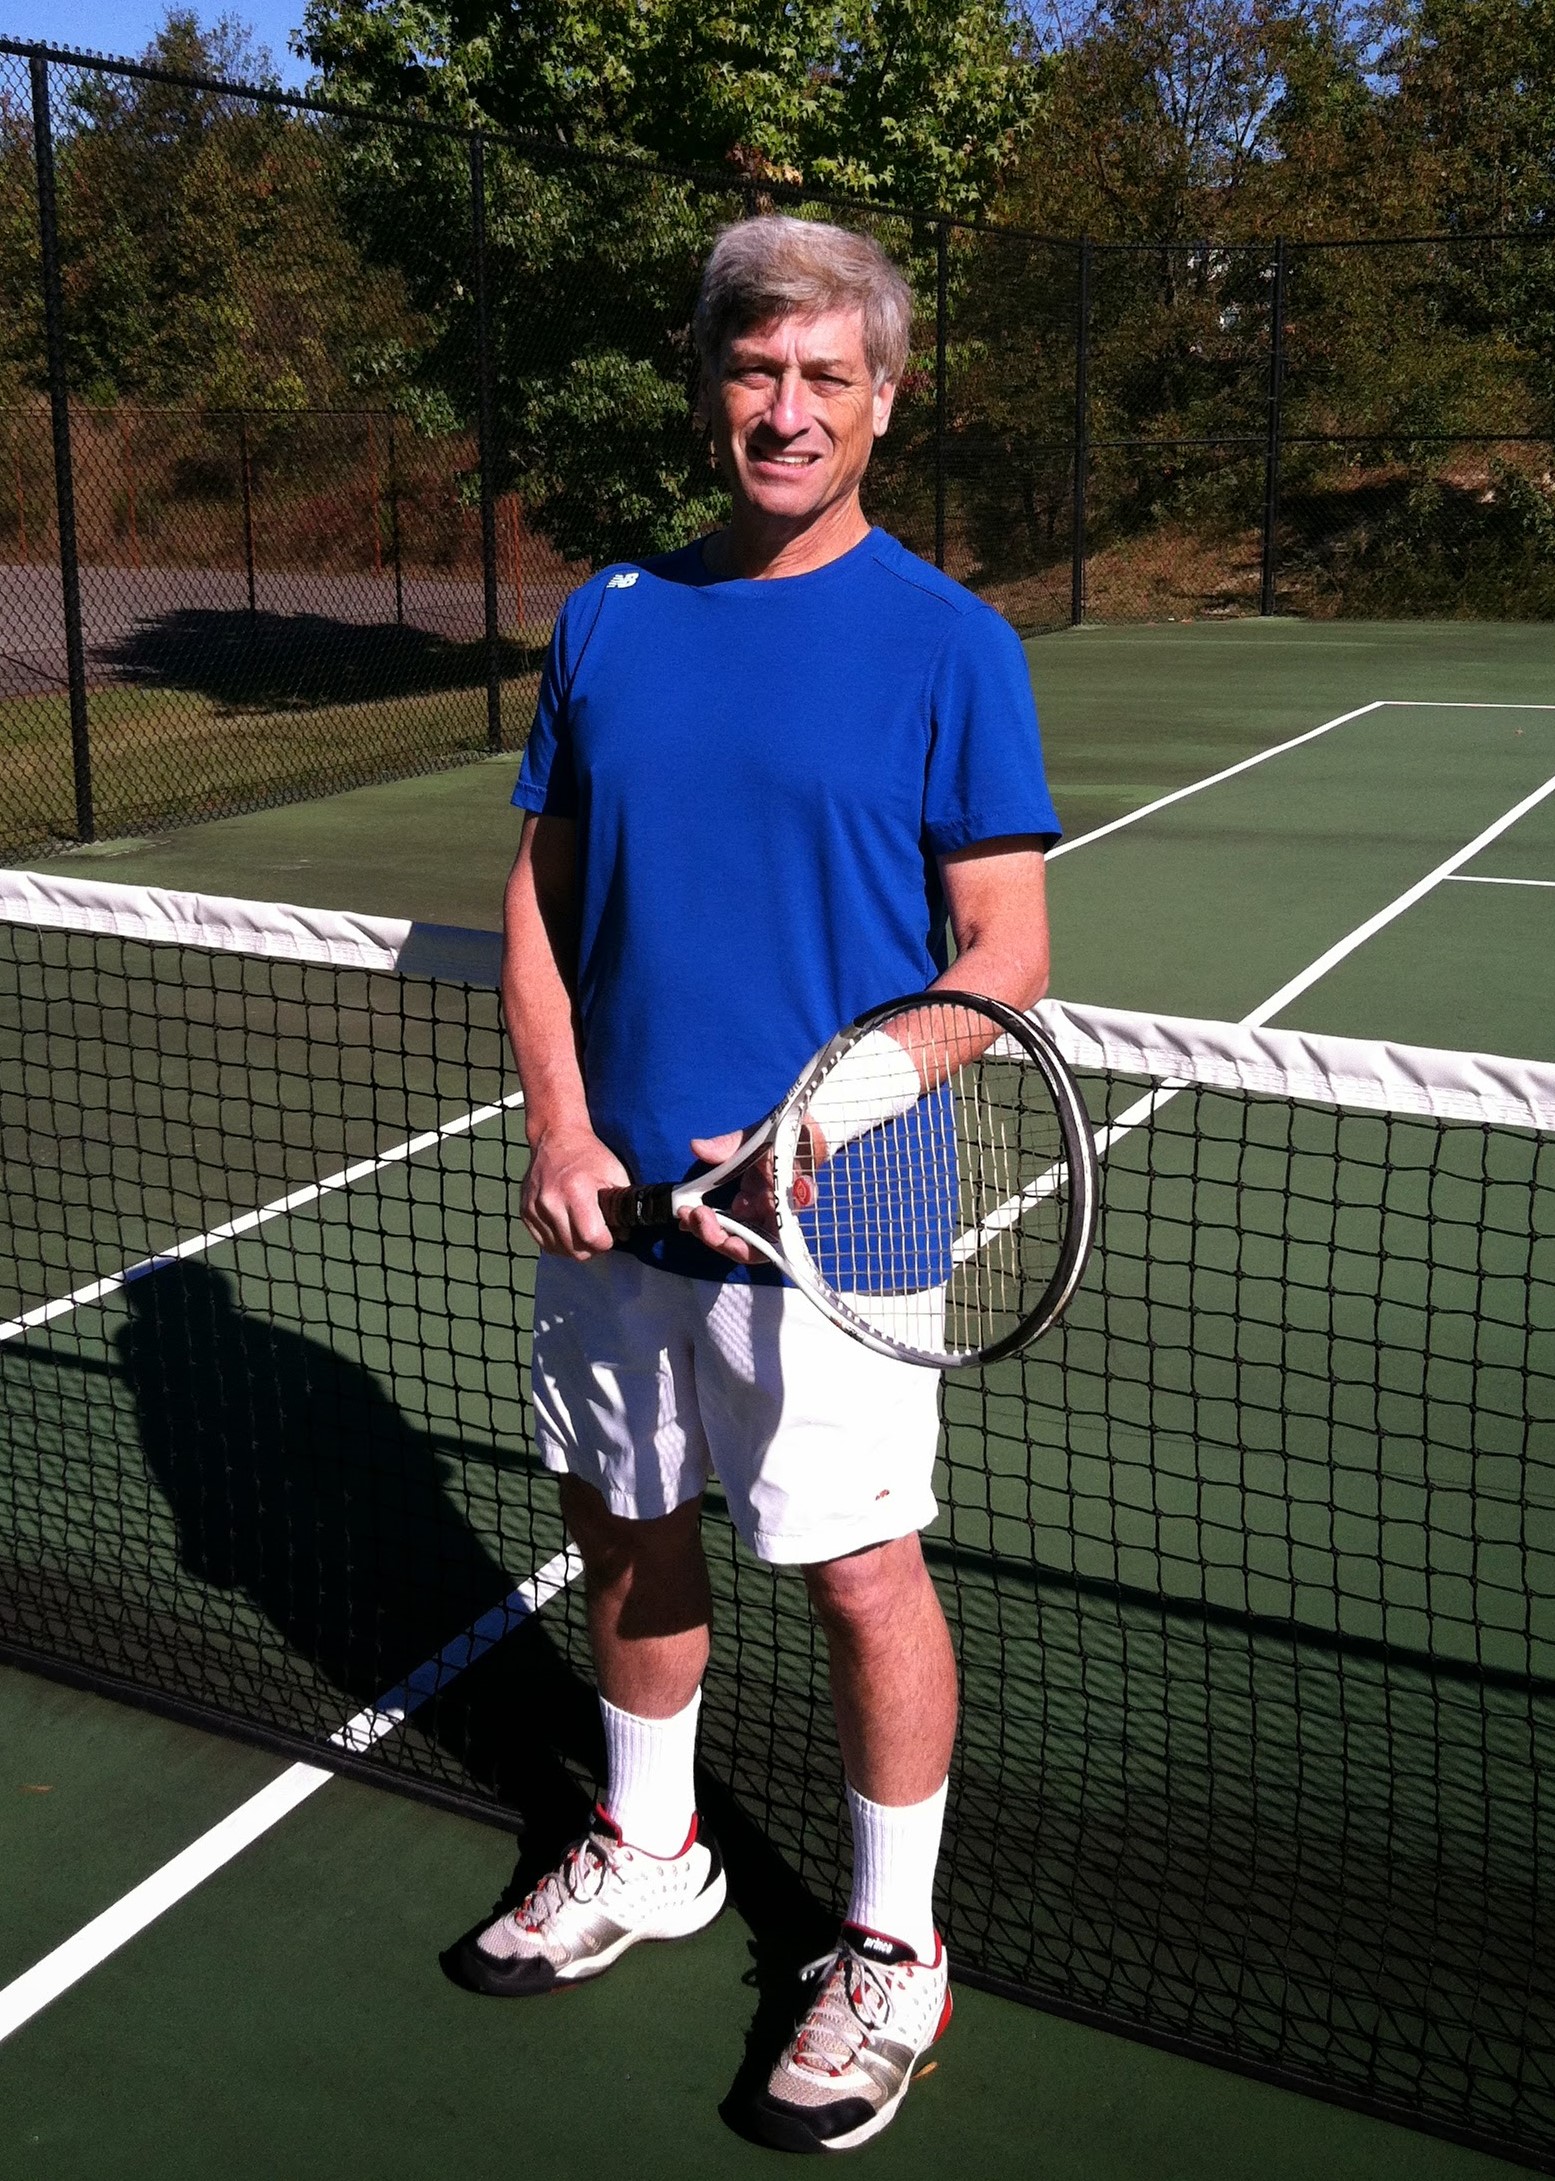 Michael H. teaches tennis lessons in Germantown, MD